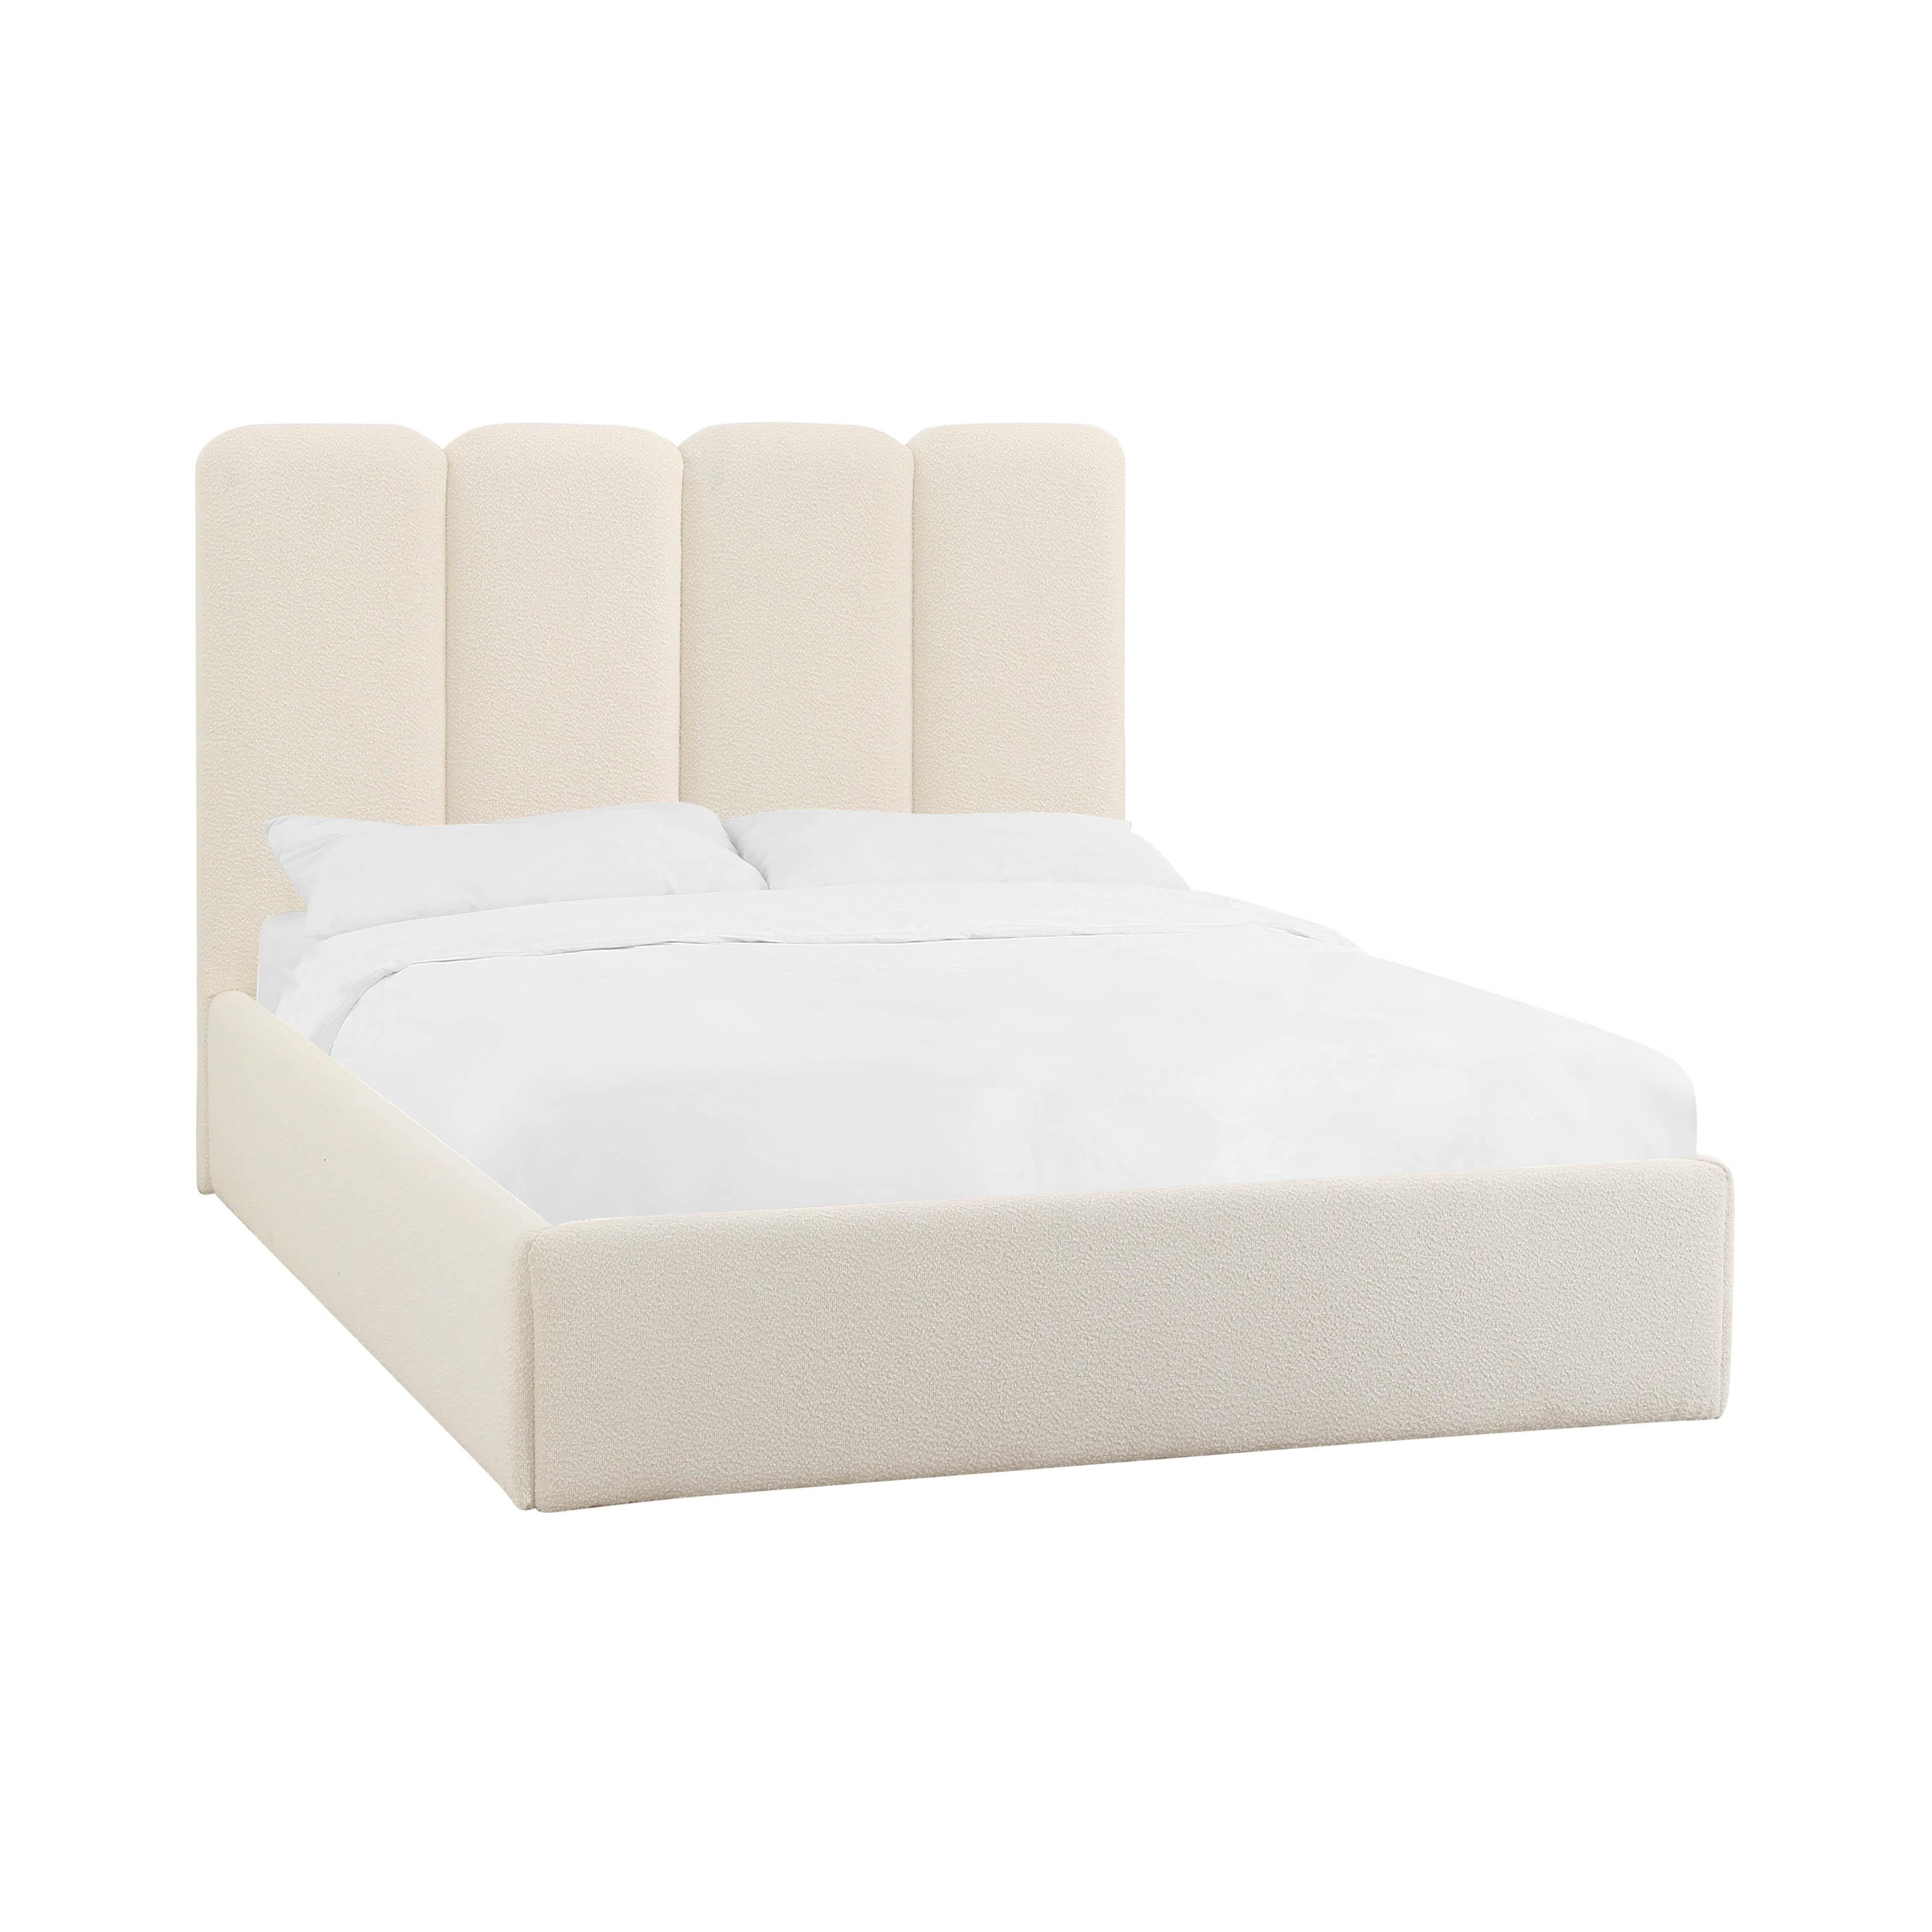 Tov Furniture Beds - Palani Cream Boucle Queen Bed